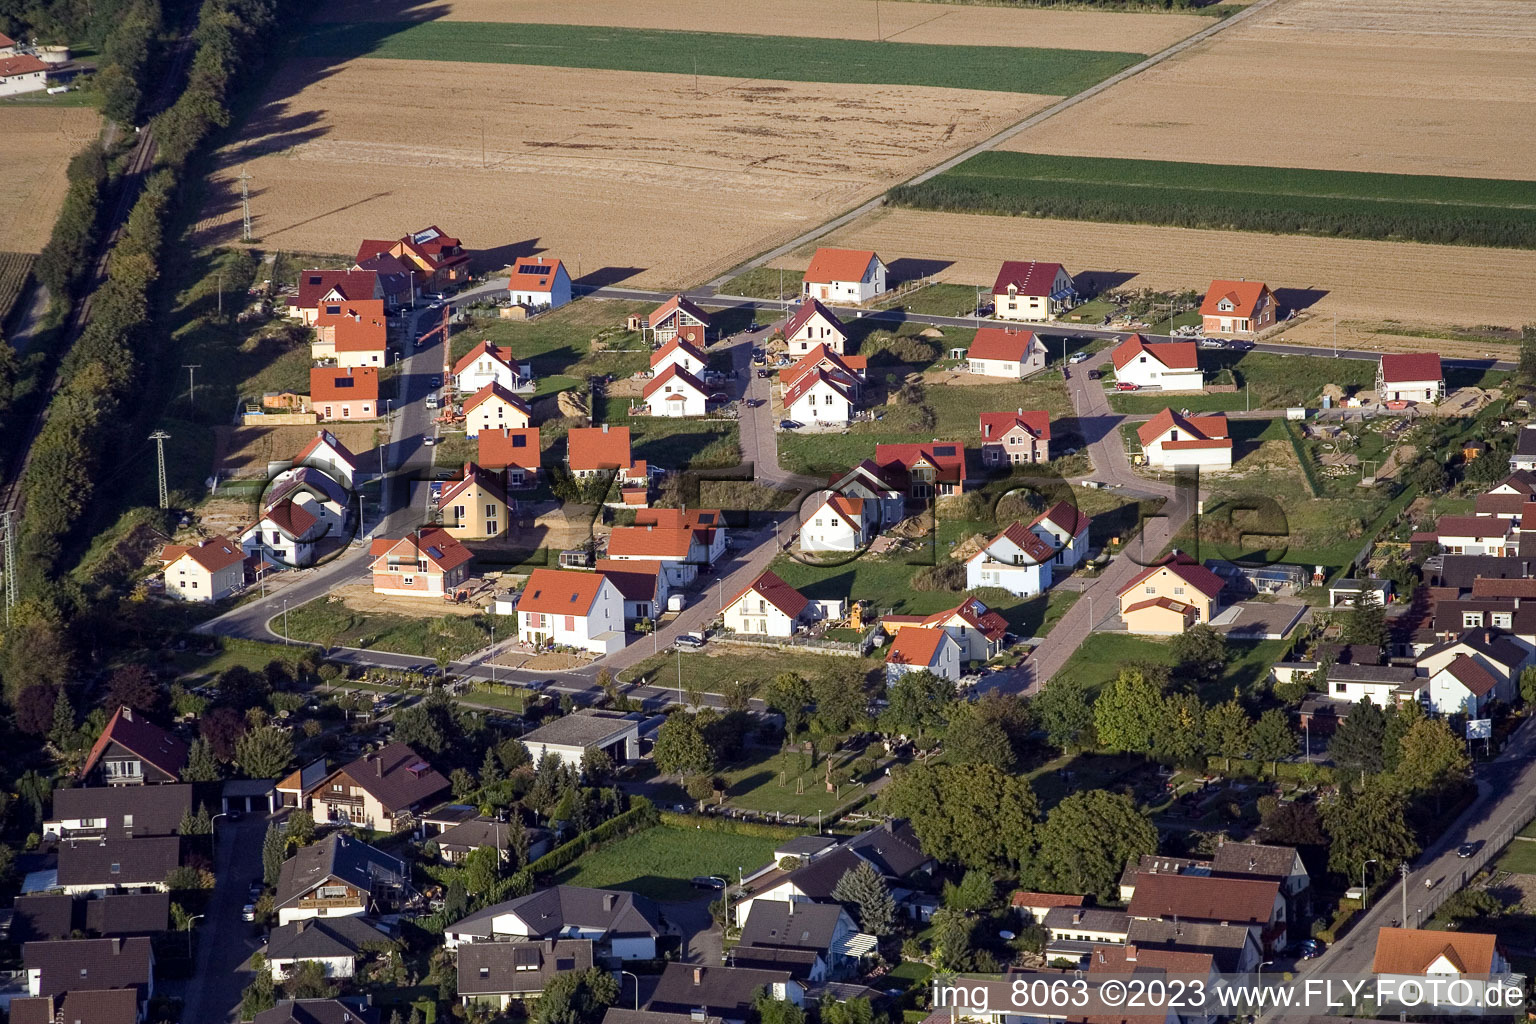 Aerial view of New development area in the district Schaidt in Wörth am Rhein in the state Rhineland-Palatinate, Germany